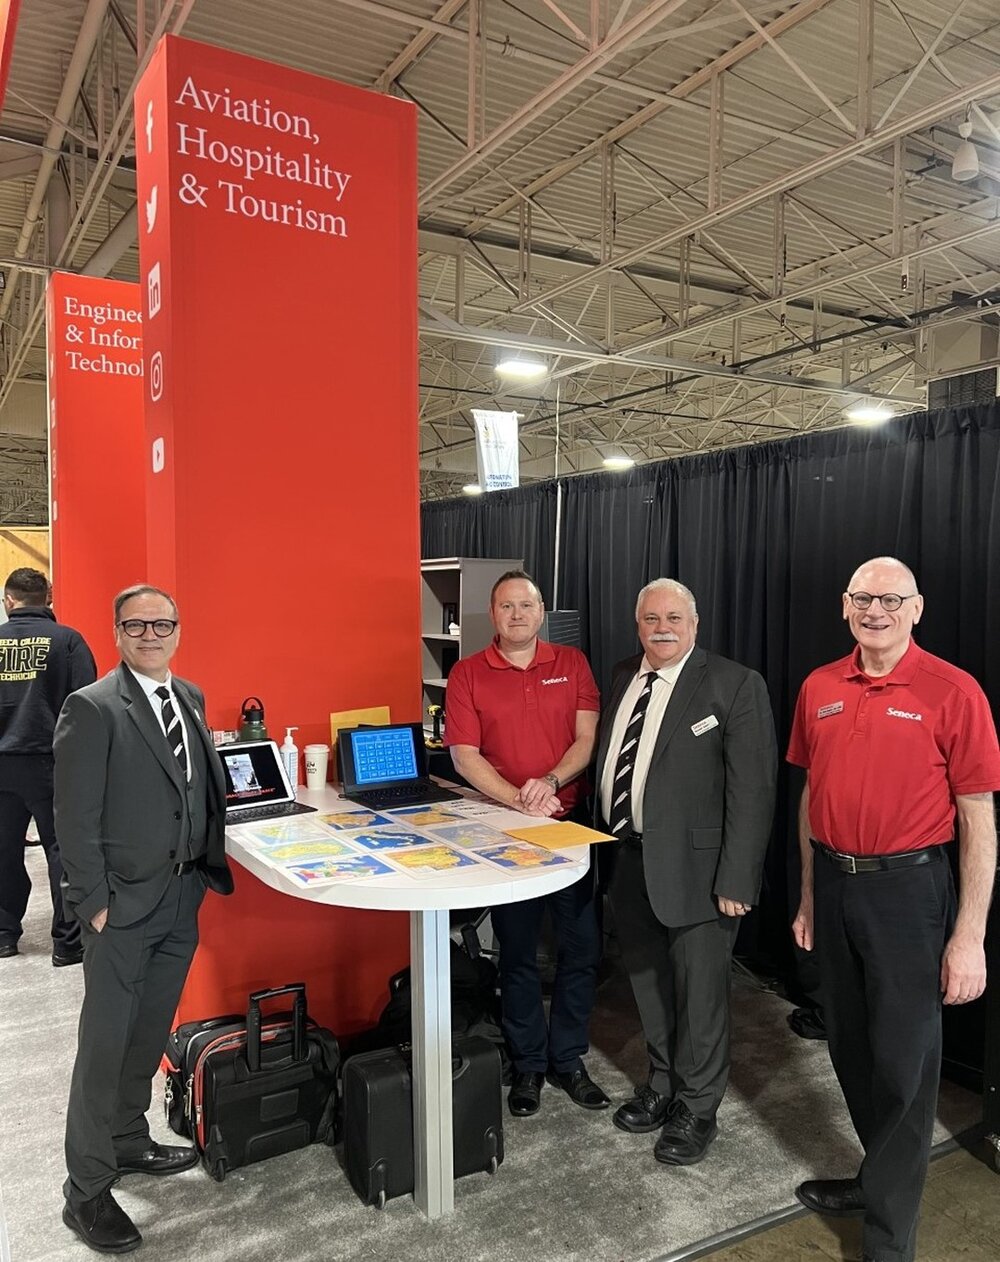 We're at Toronto Congress Centre for Skills Ontario! Visit our booth, play games with us, and explore career opportunities. 

Free admission on May 1-2 from 9 am - 3 pm! See you!